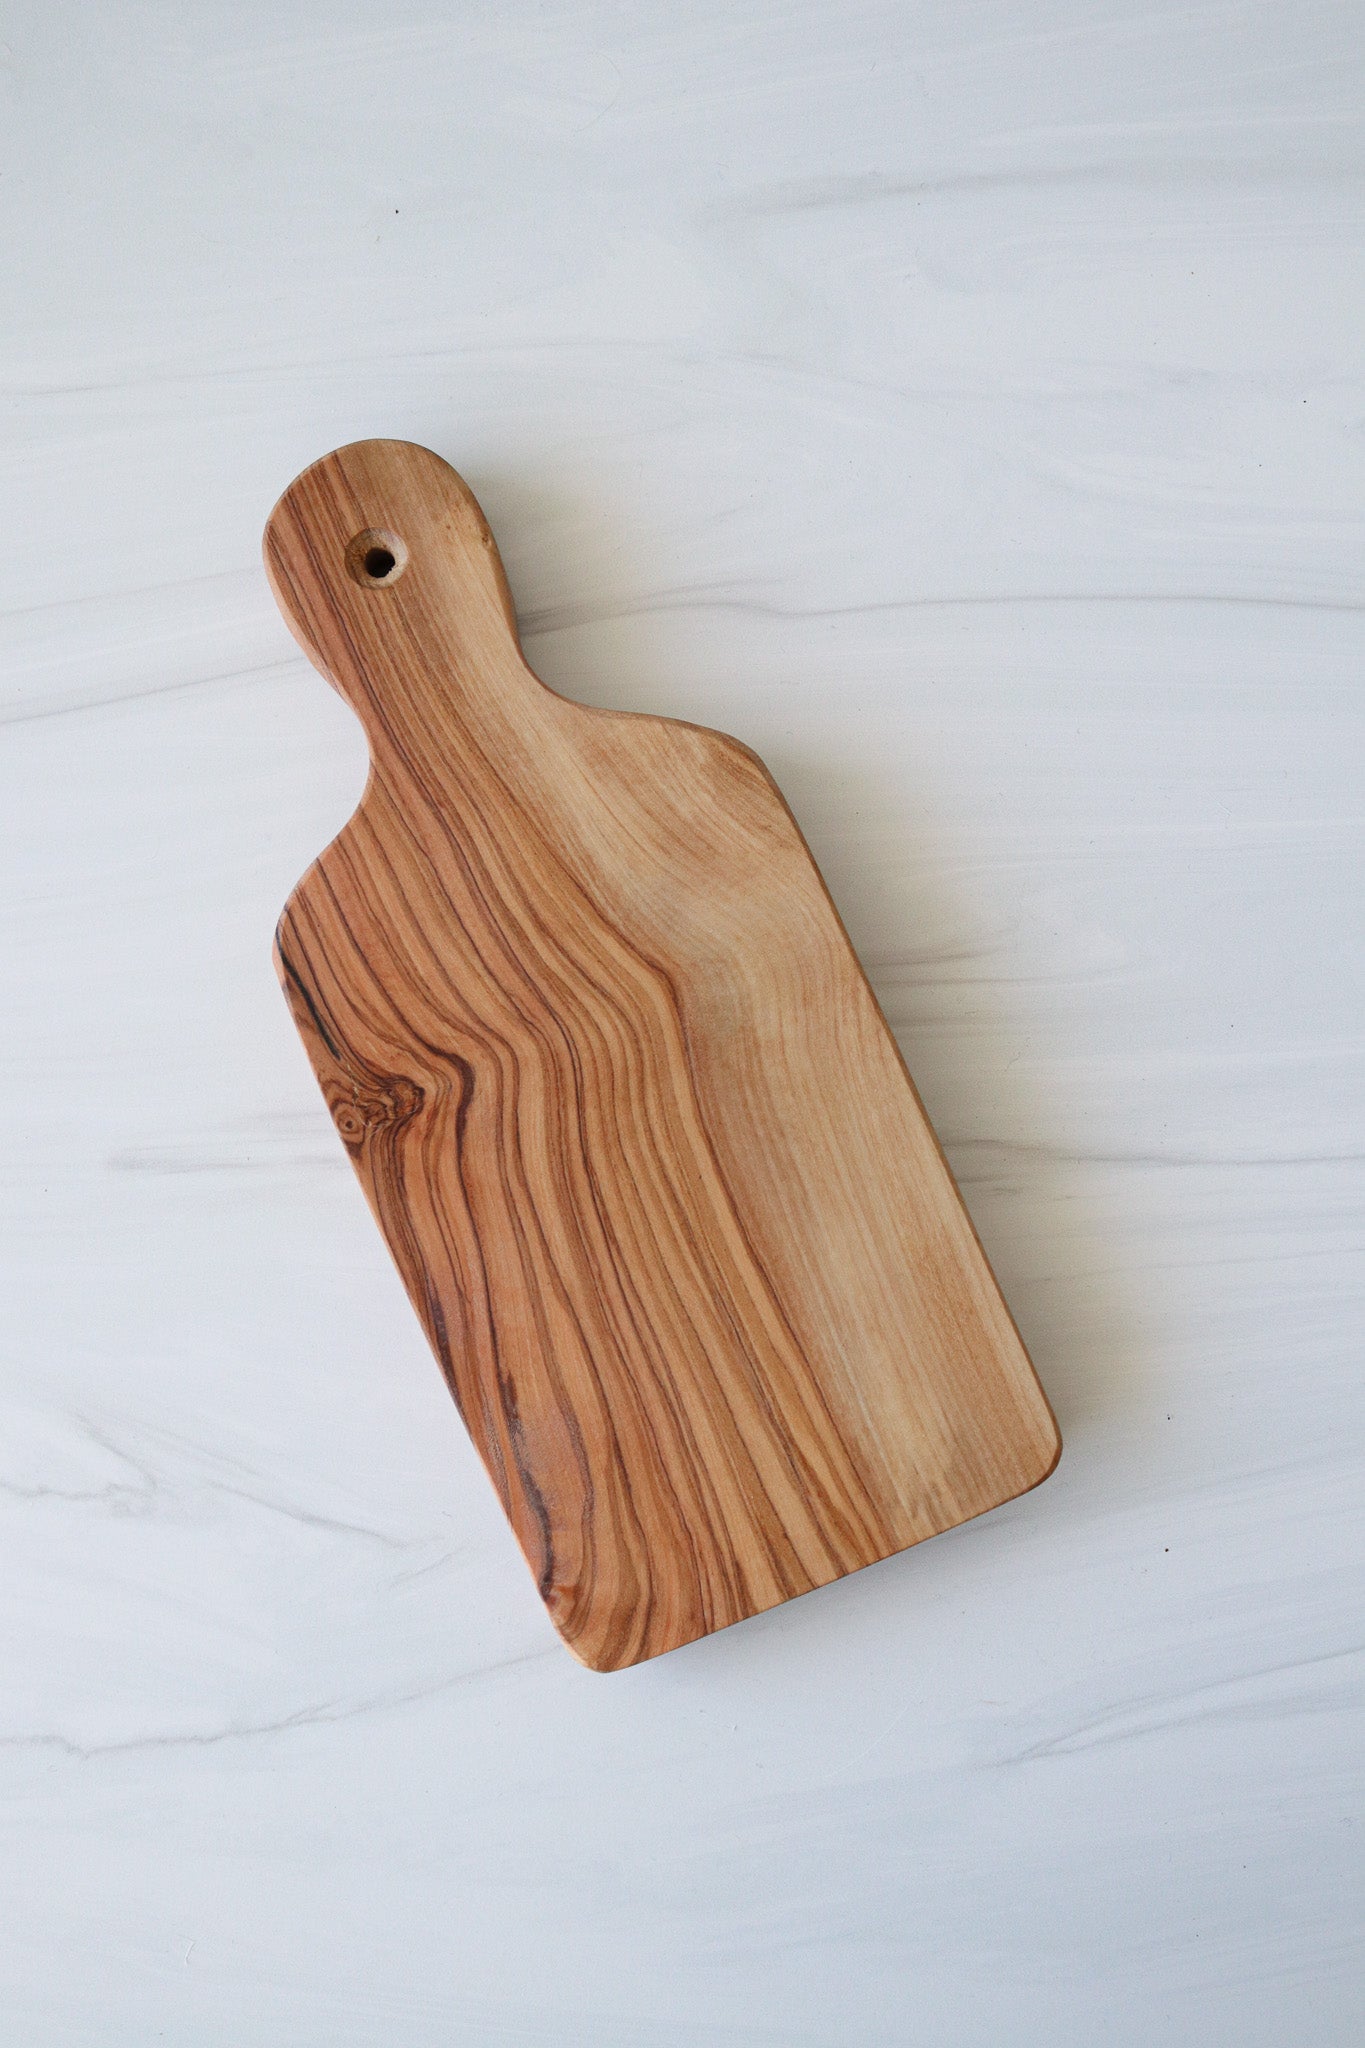 Small Olive Wood Paddle Chopping Board